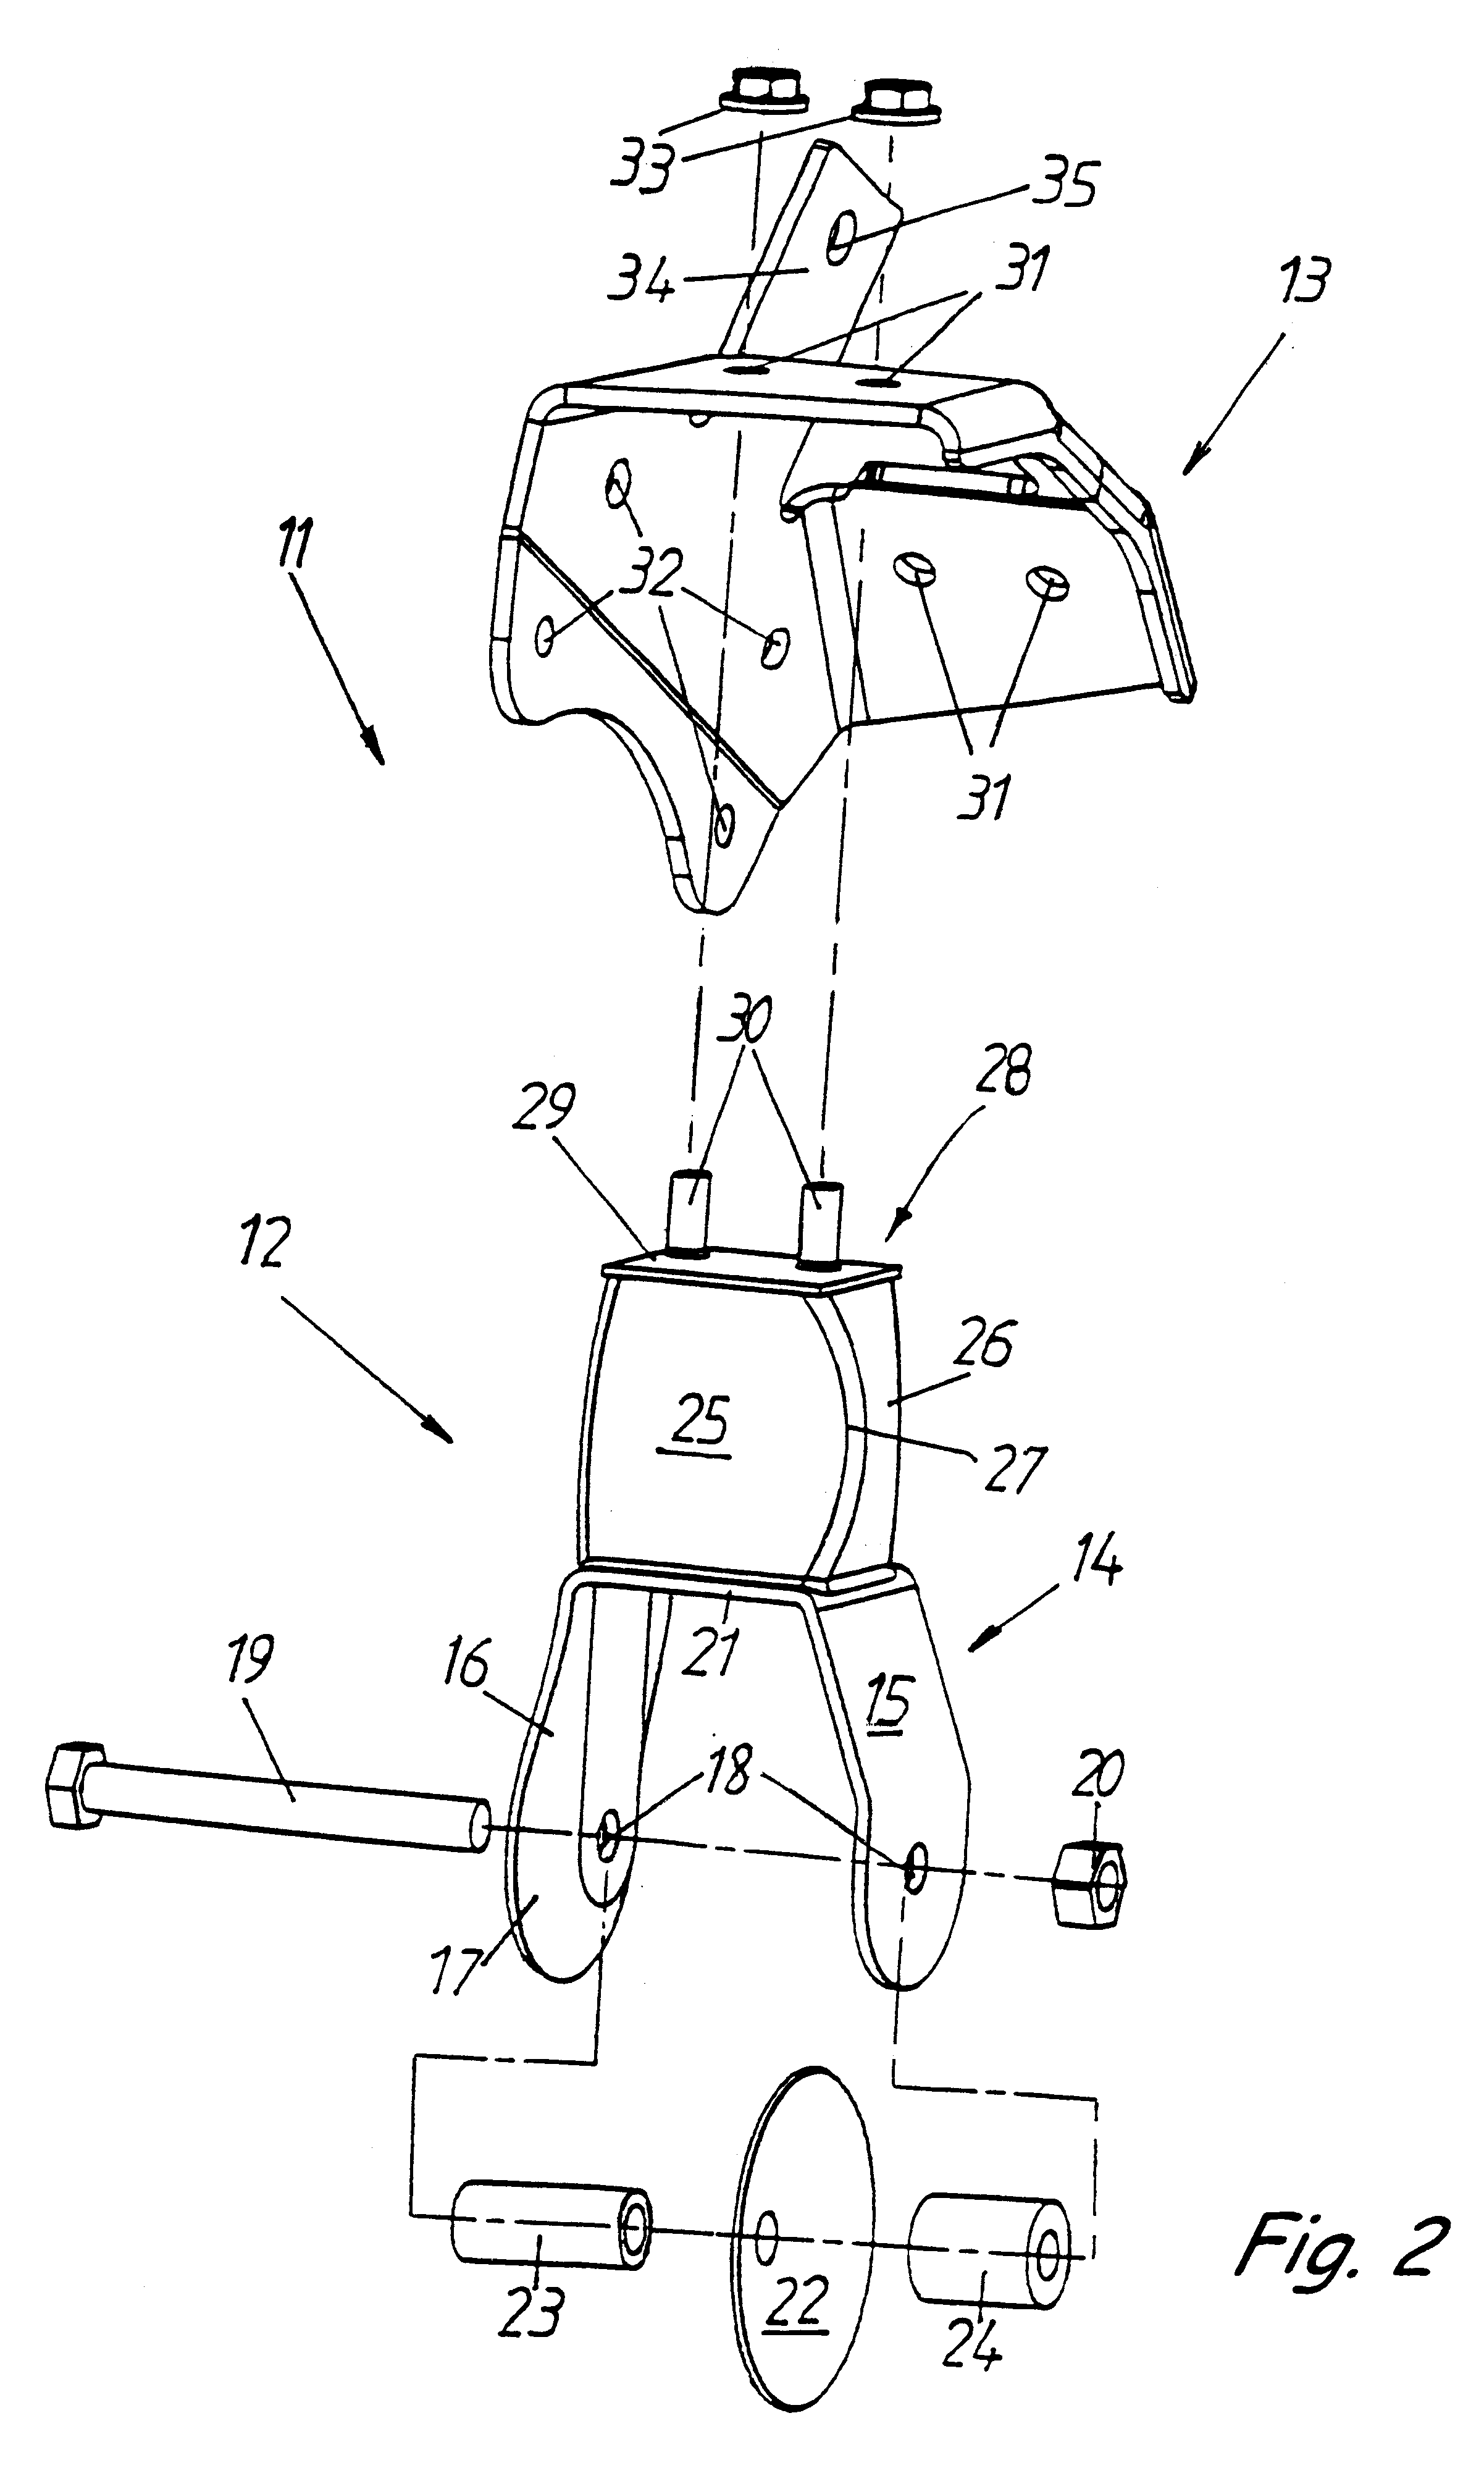 Arrangement for firmly locking an engine bonnet to a vehicle cab